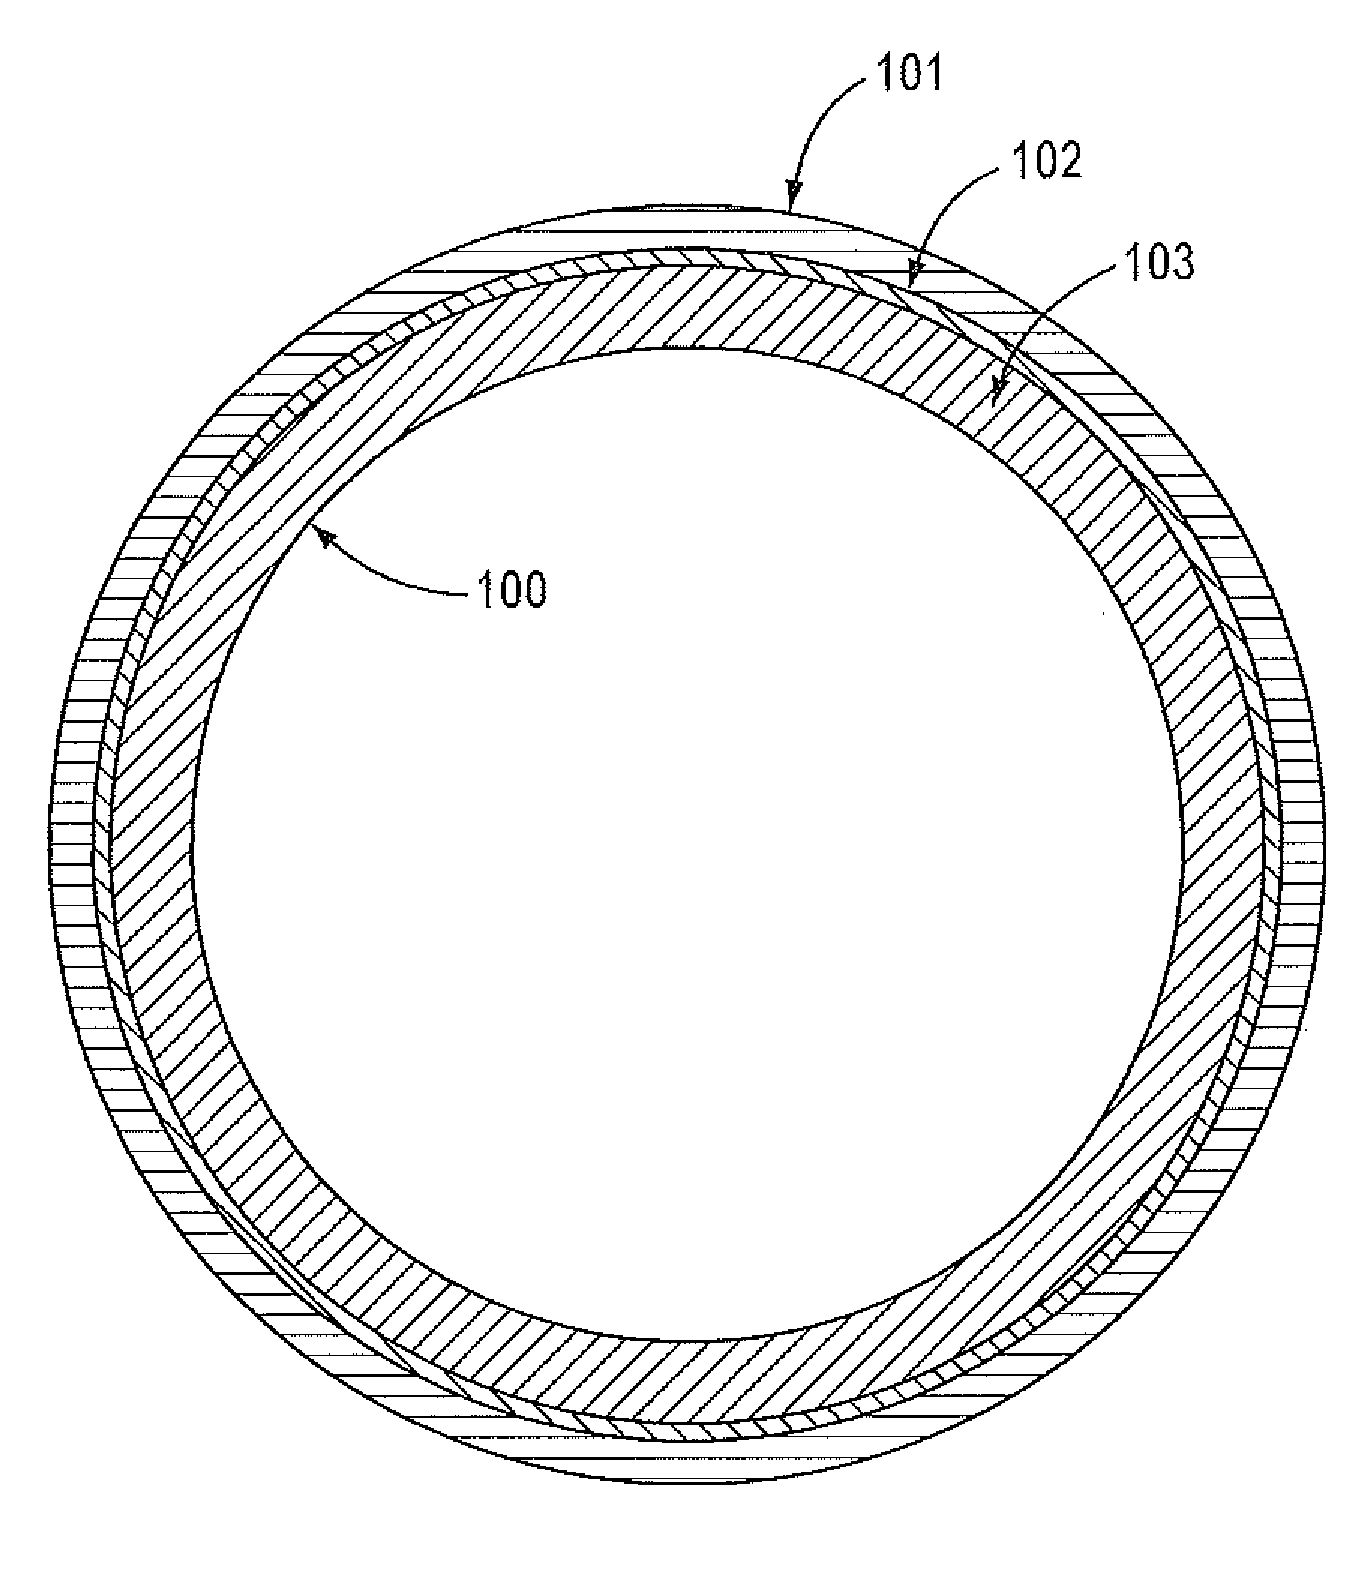 Joint and joining method for multilayer composite tubing and fittings